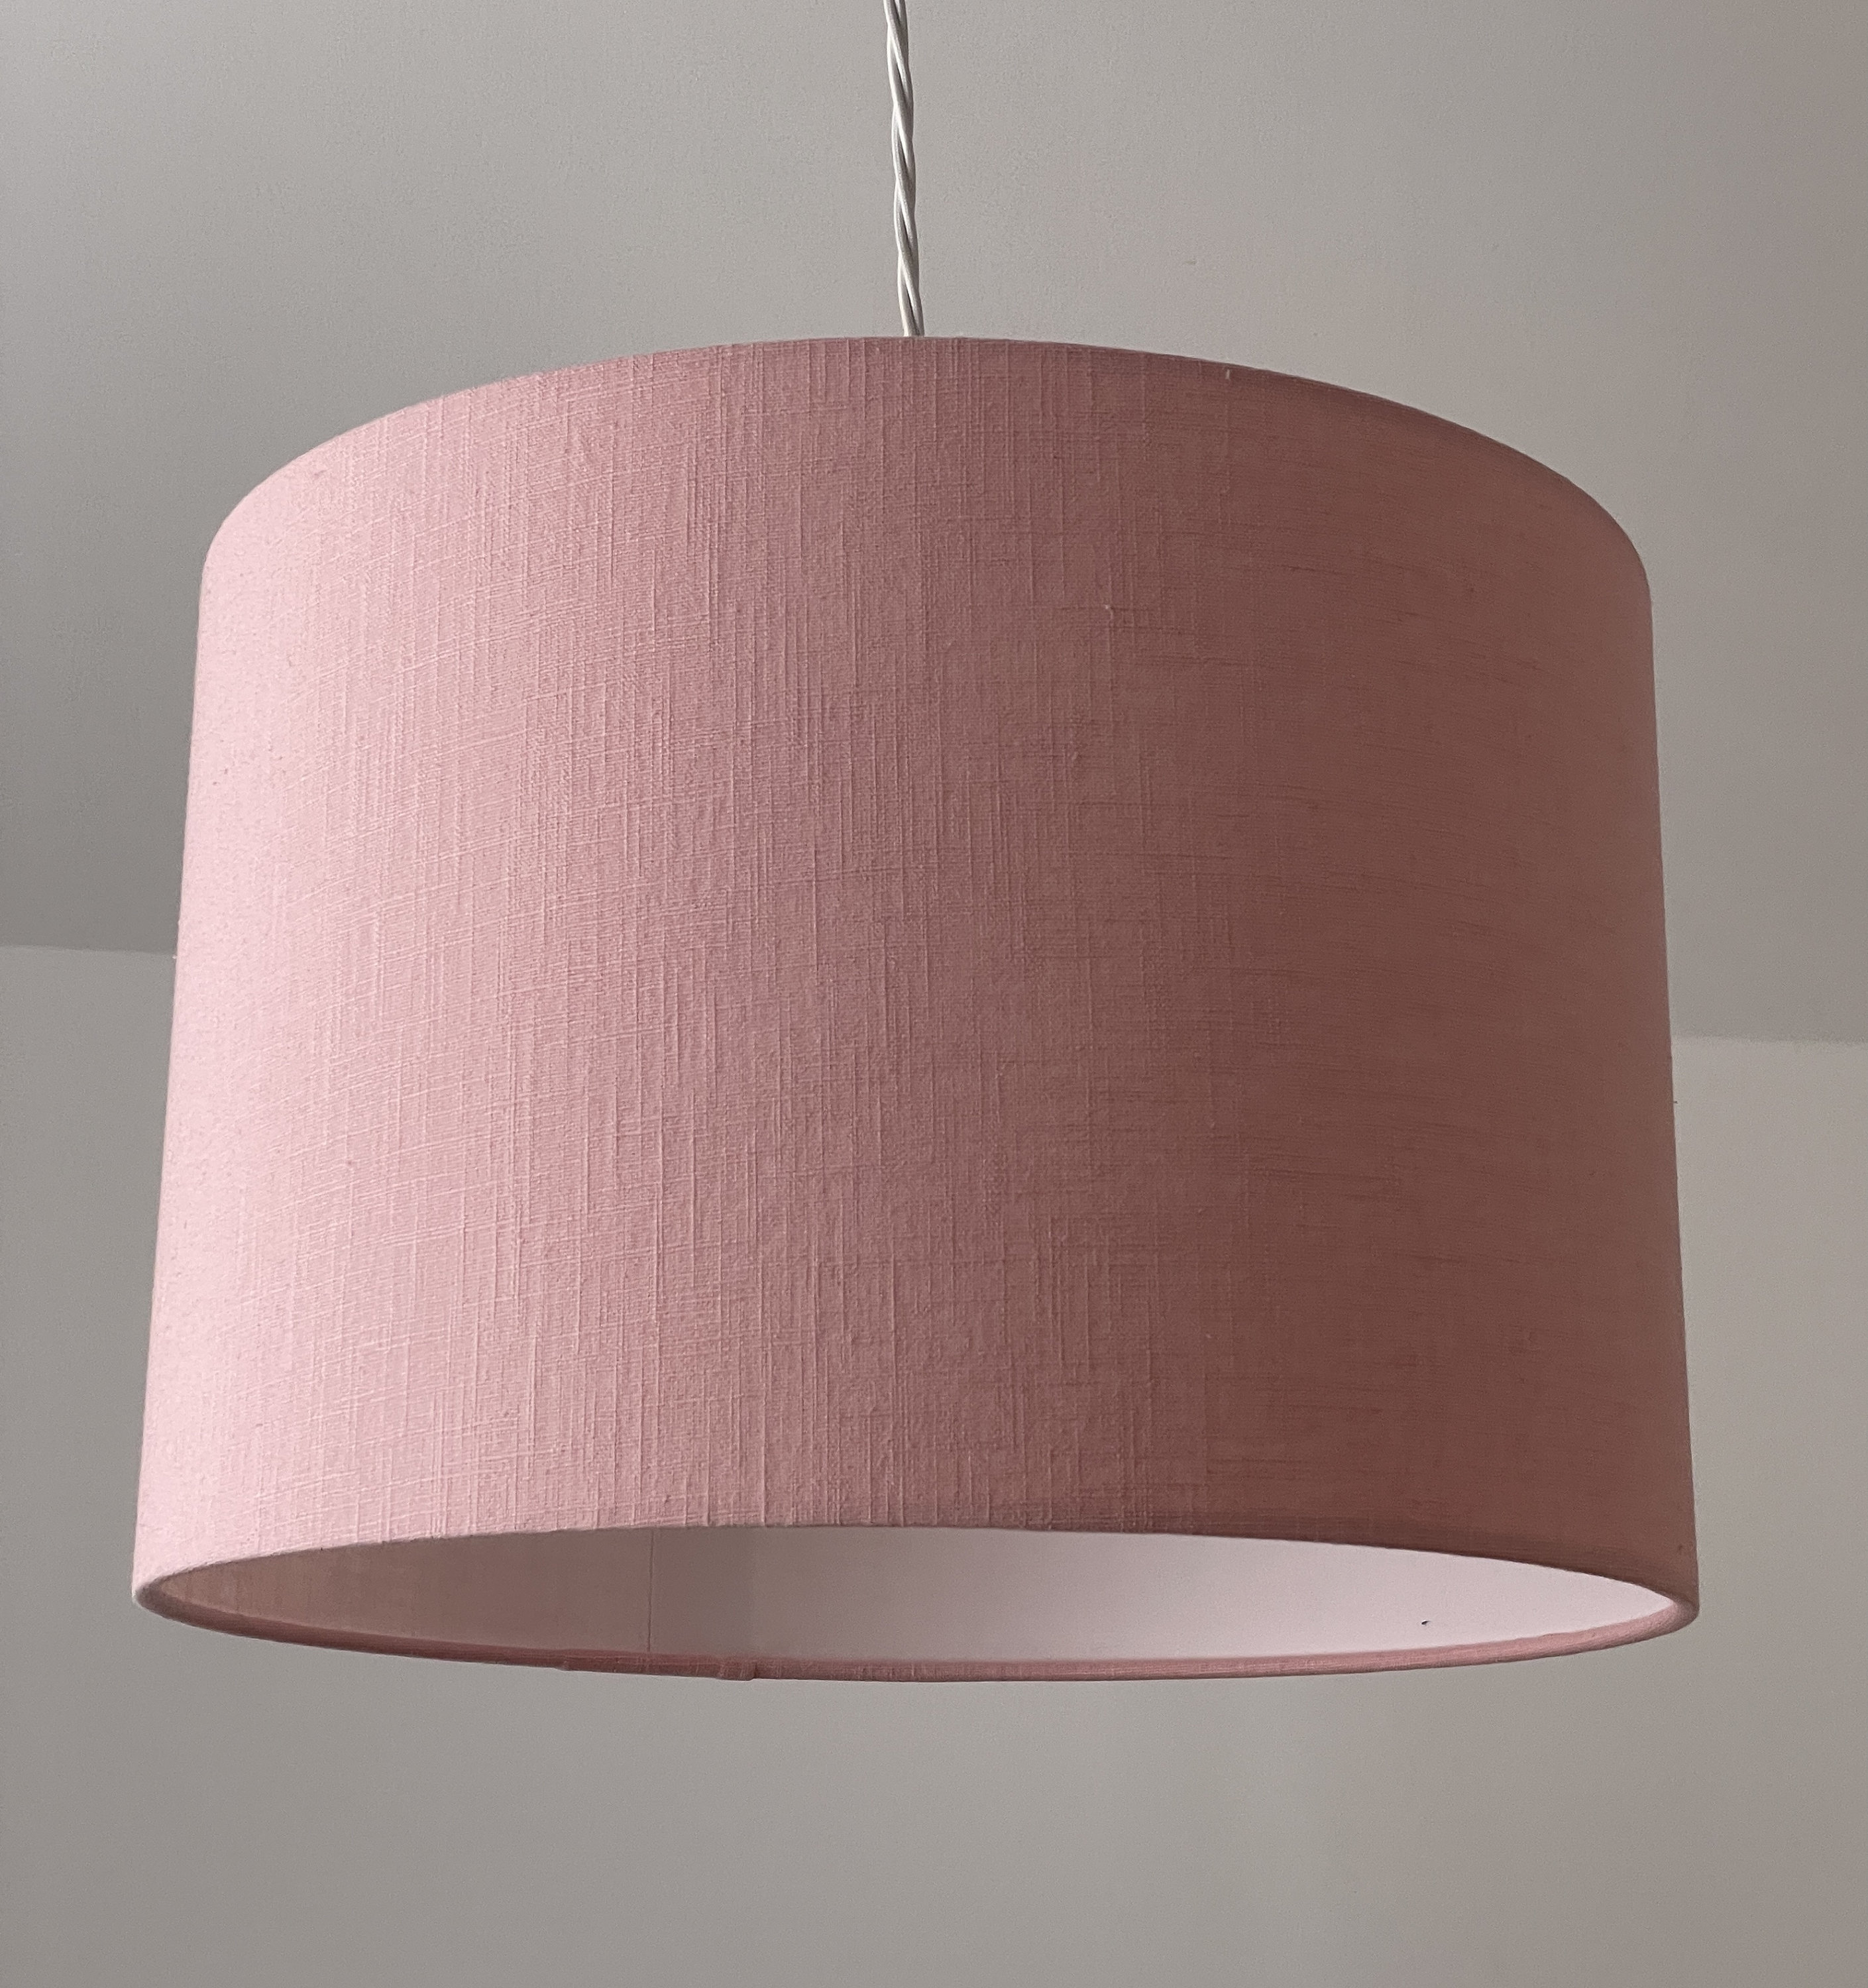 Pink Ceiling Light Shade Pink Cotton Fabric Easy Fit Ceiling Lightshade Modern 25cm Drum Shade